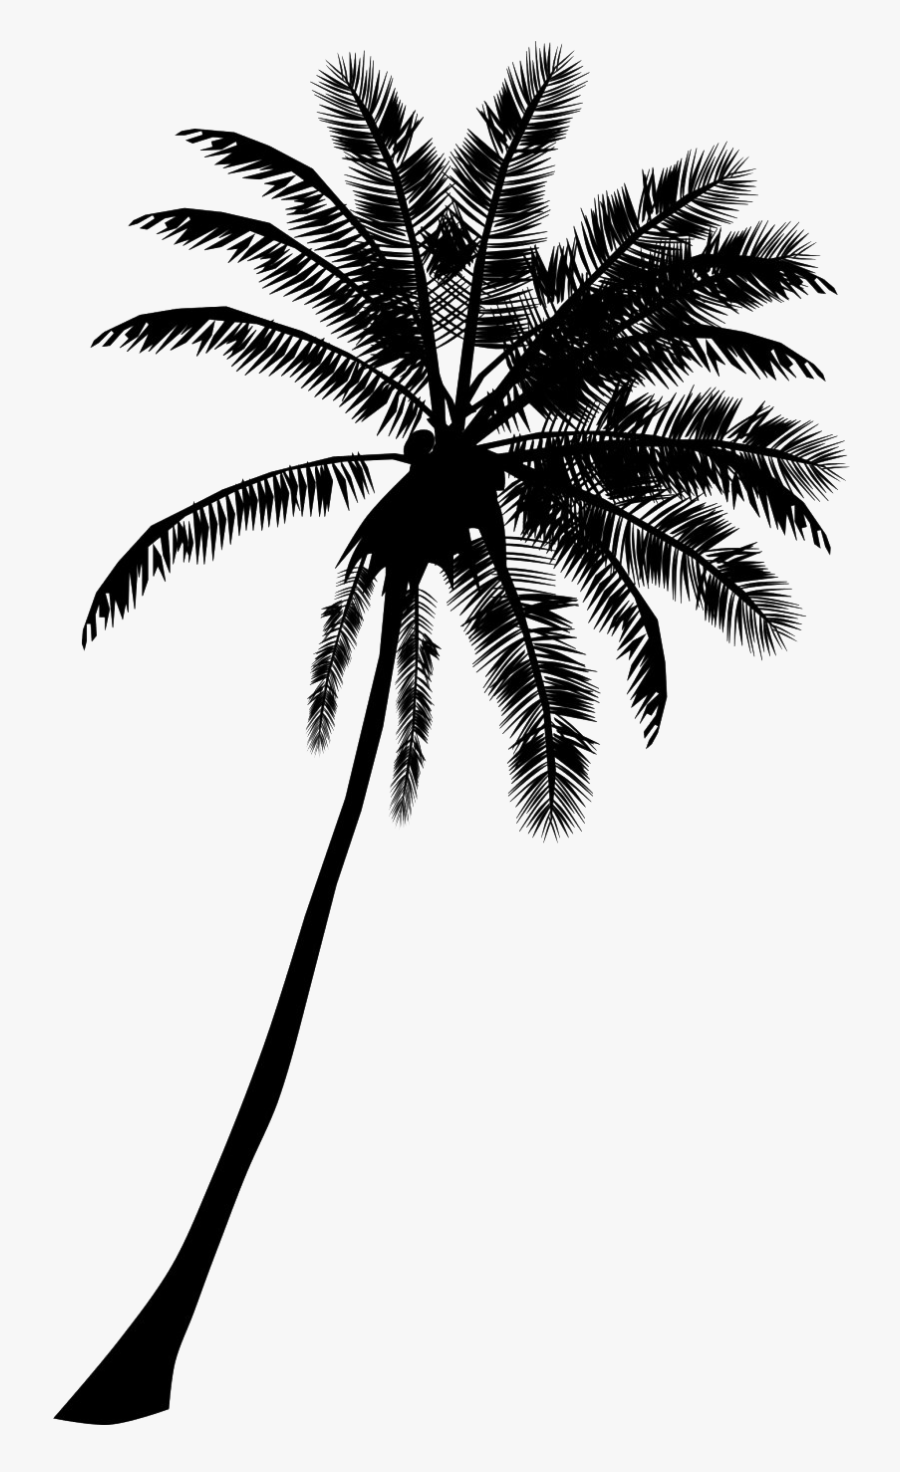 Black Palm Tree Png Hd Quality - Palm Tree Silhouette Clipart, Transparent Clipart